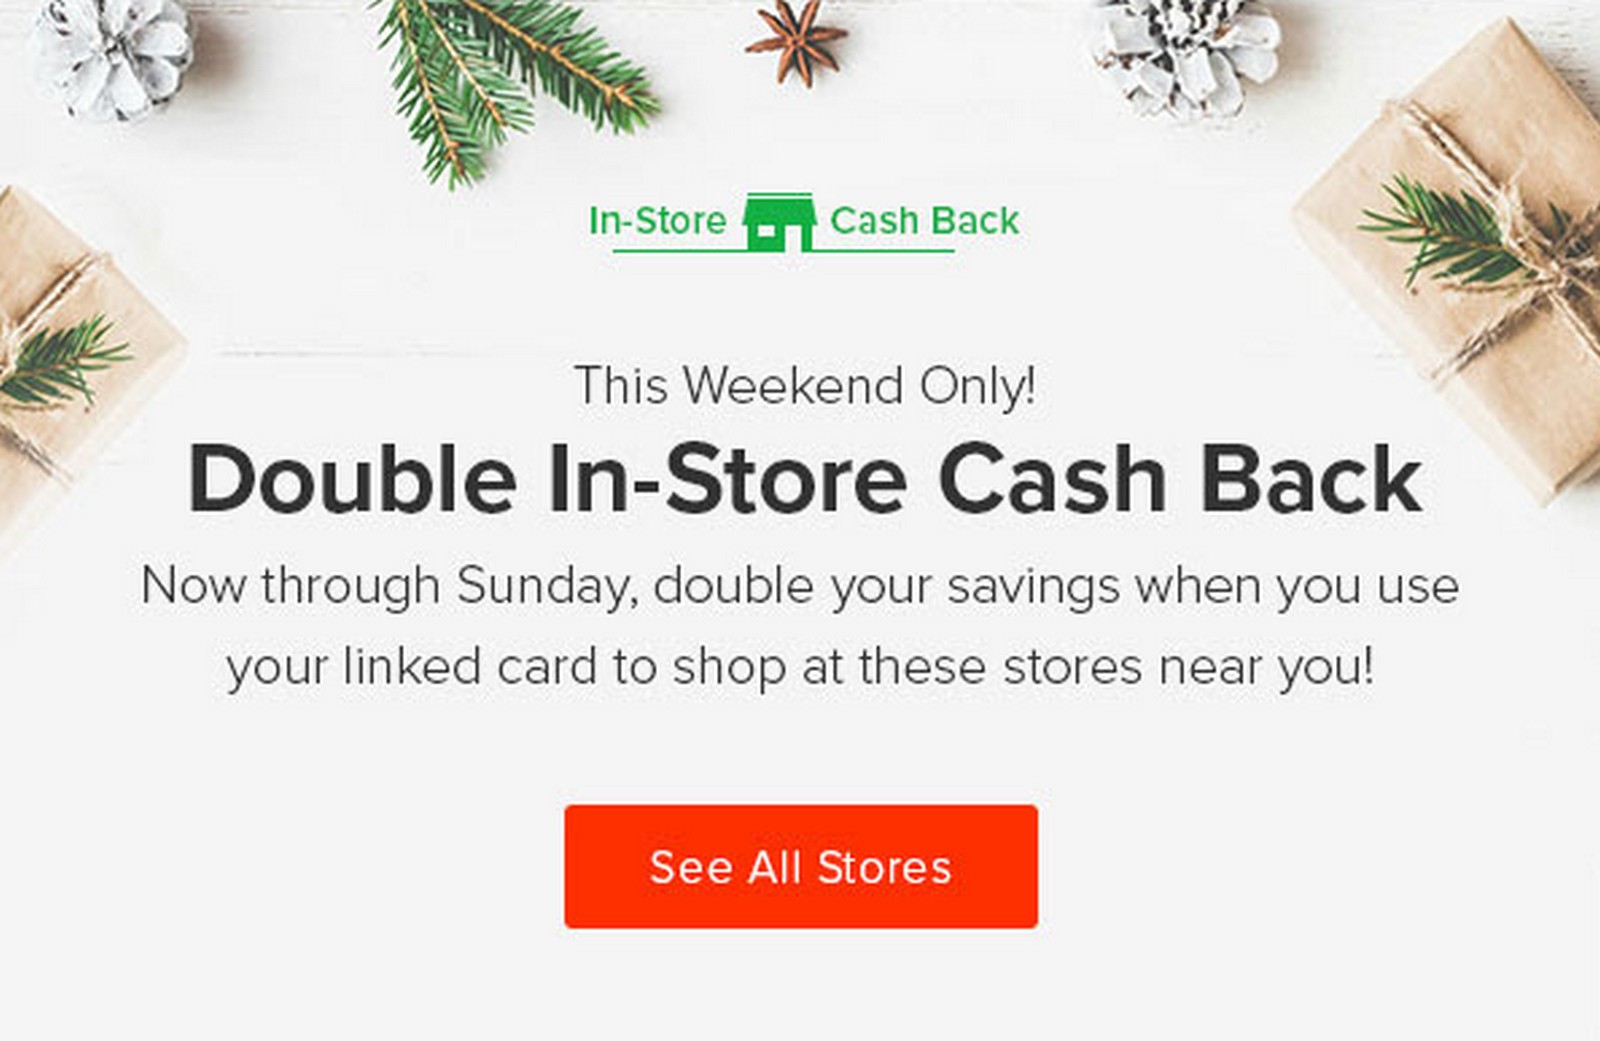 Ebates Doubles In Store Cash Back for Many Stores